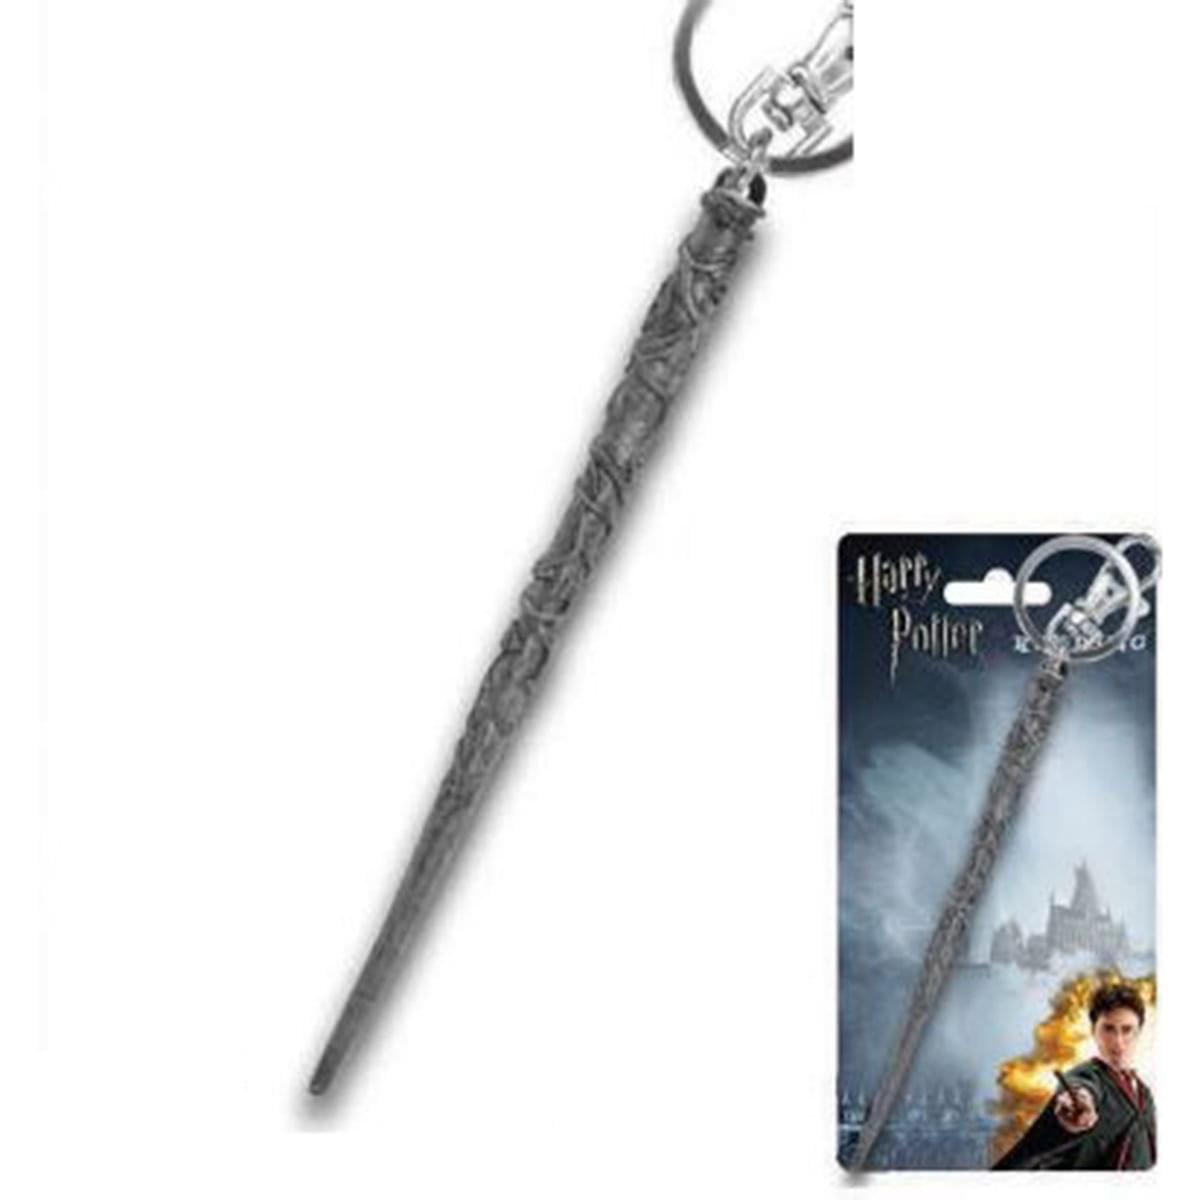 Harry Potter Pewter Key Ring: Hermione's Wand